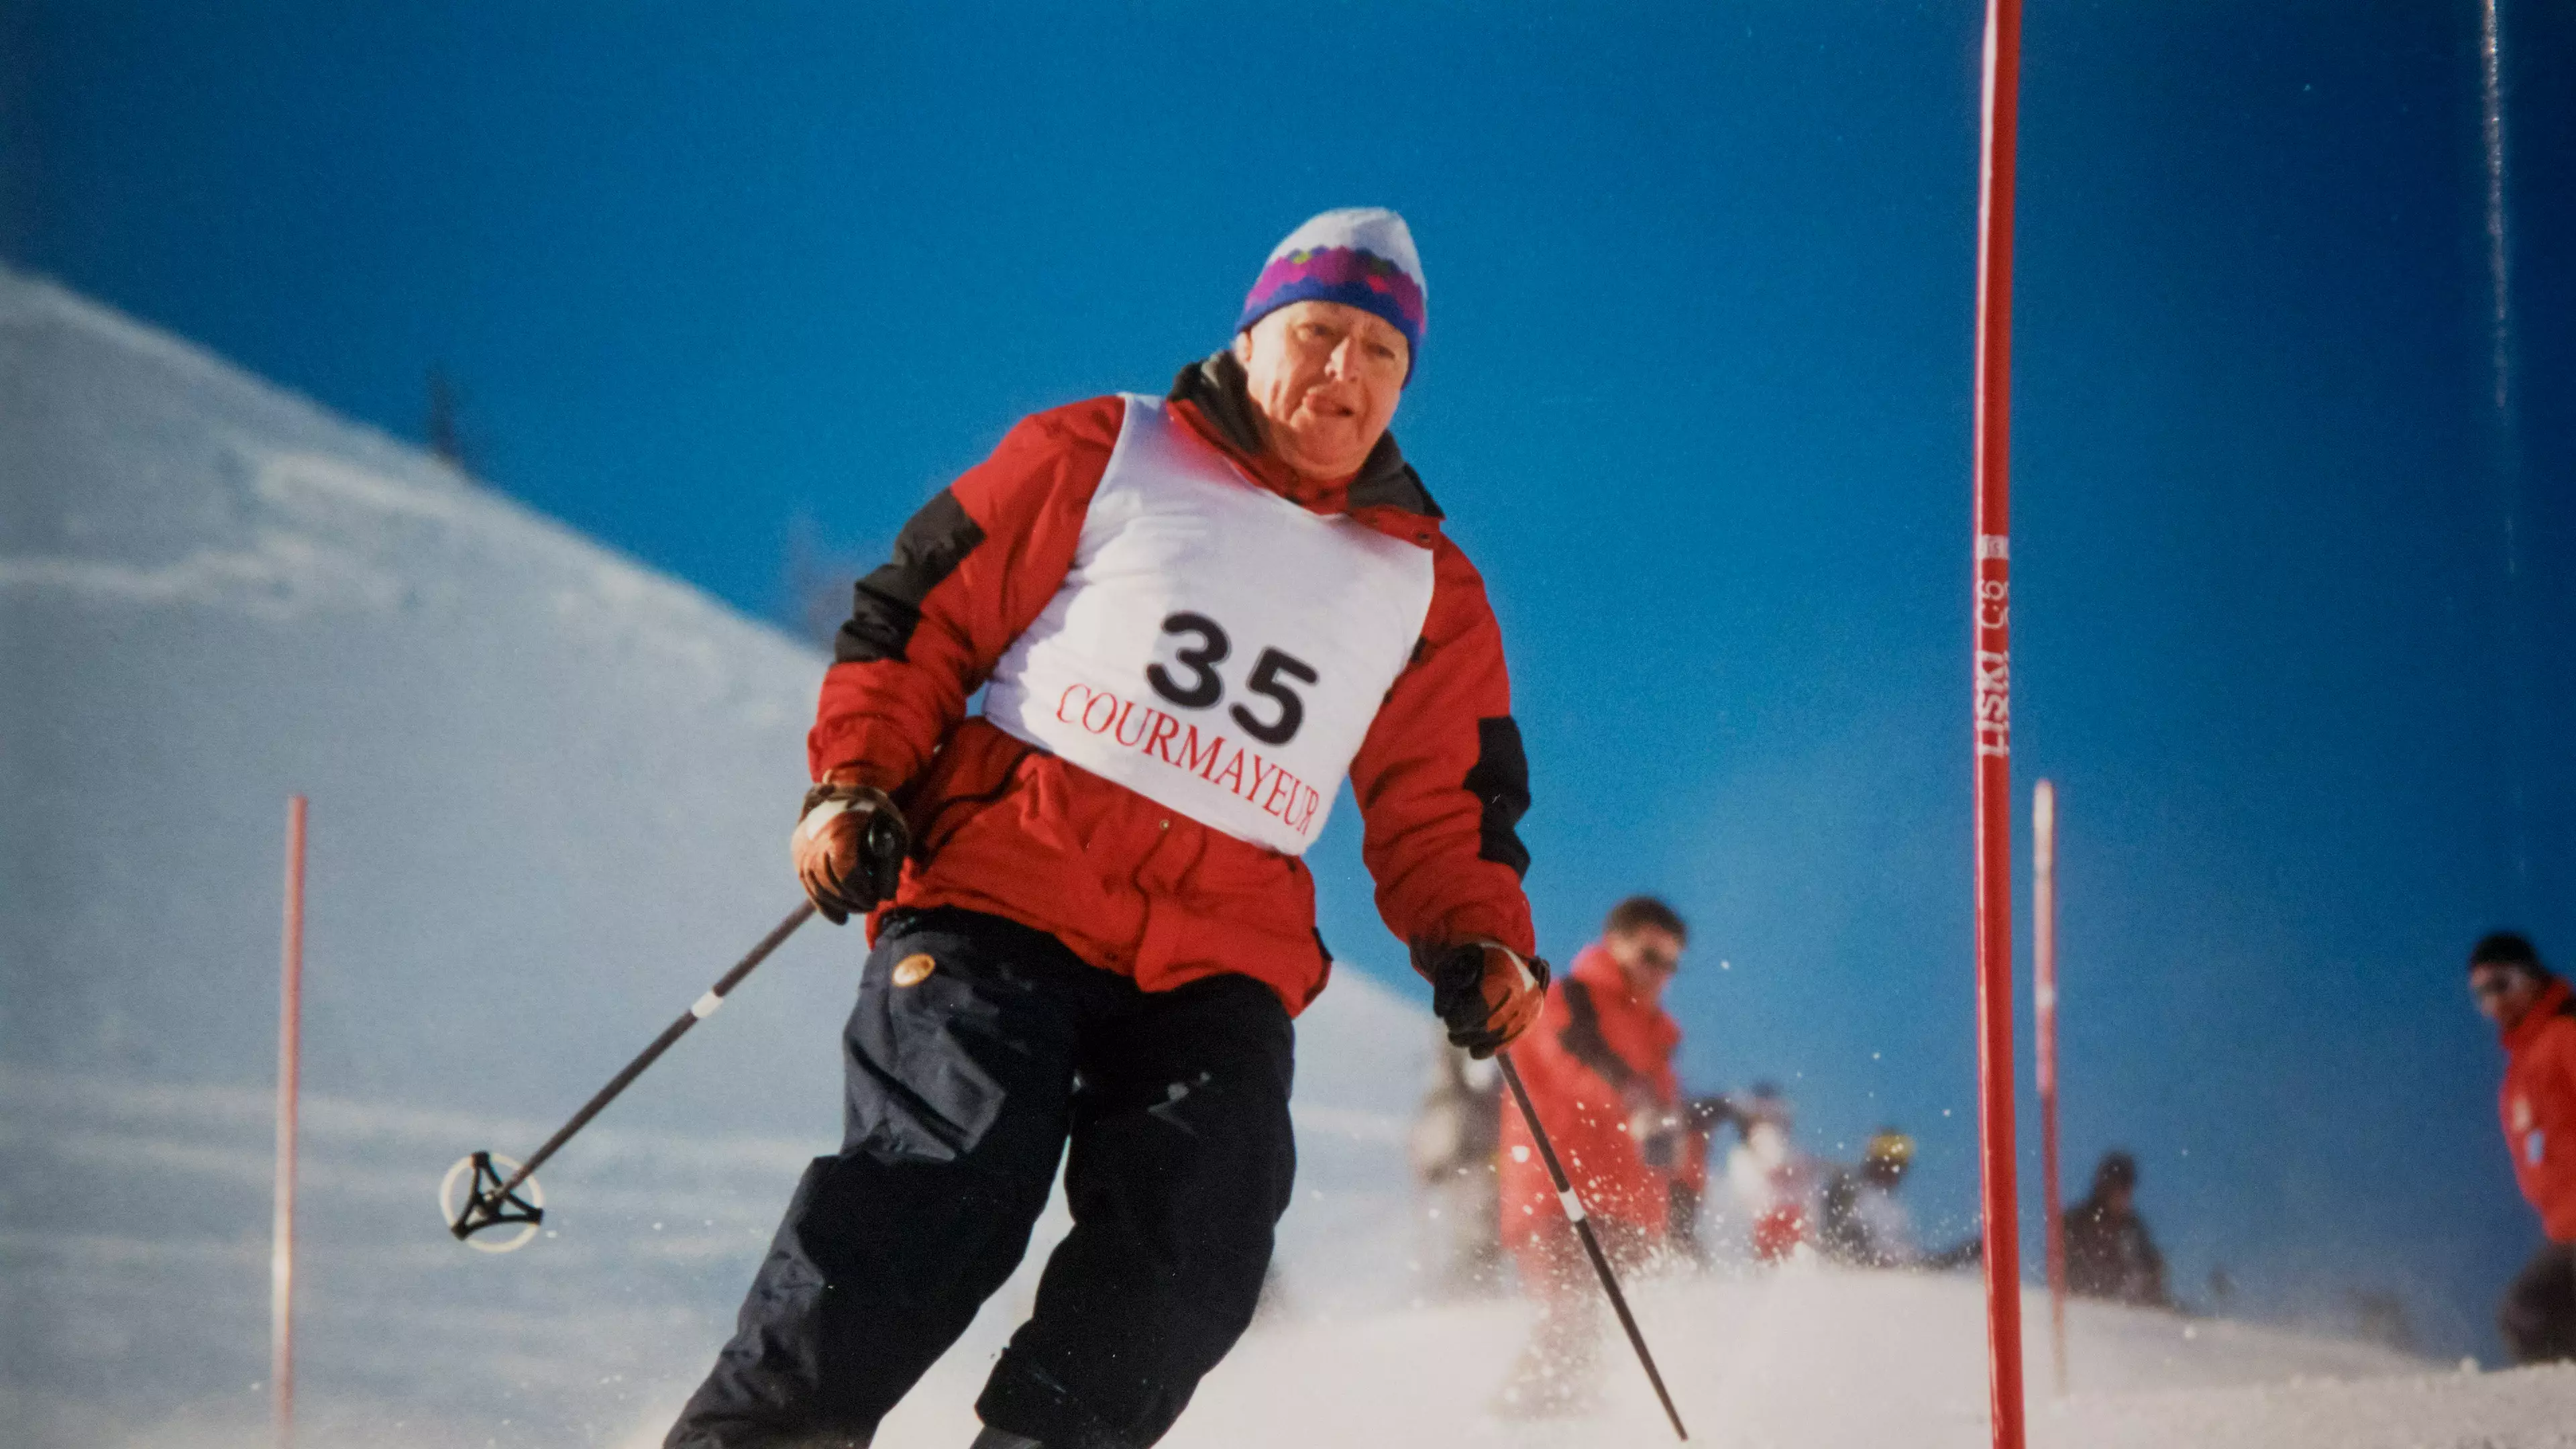 Britain's Oldest Skier Vows To Return To The Slopes At Age Of 98